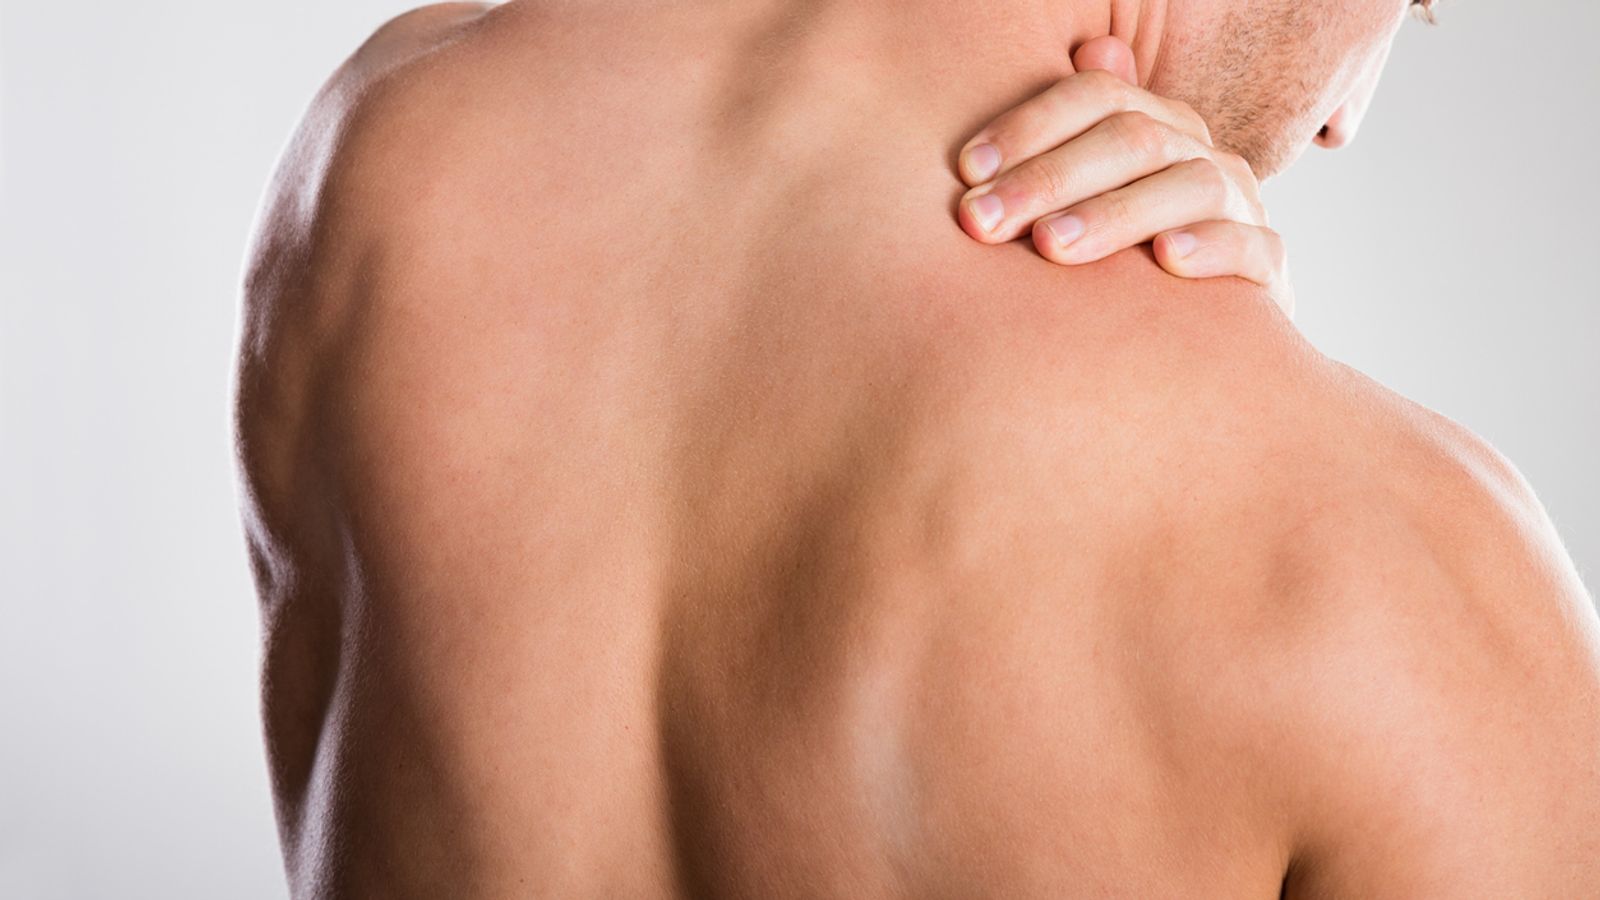 Male birth control applied as gel to shoulders works faster than other methods, trial shows